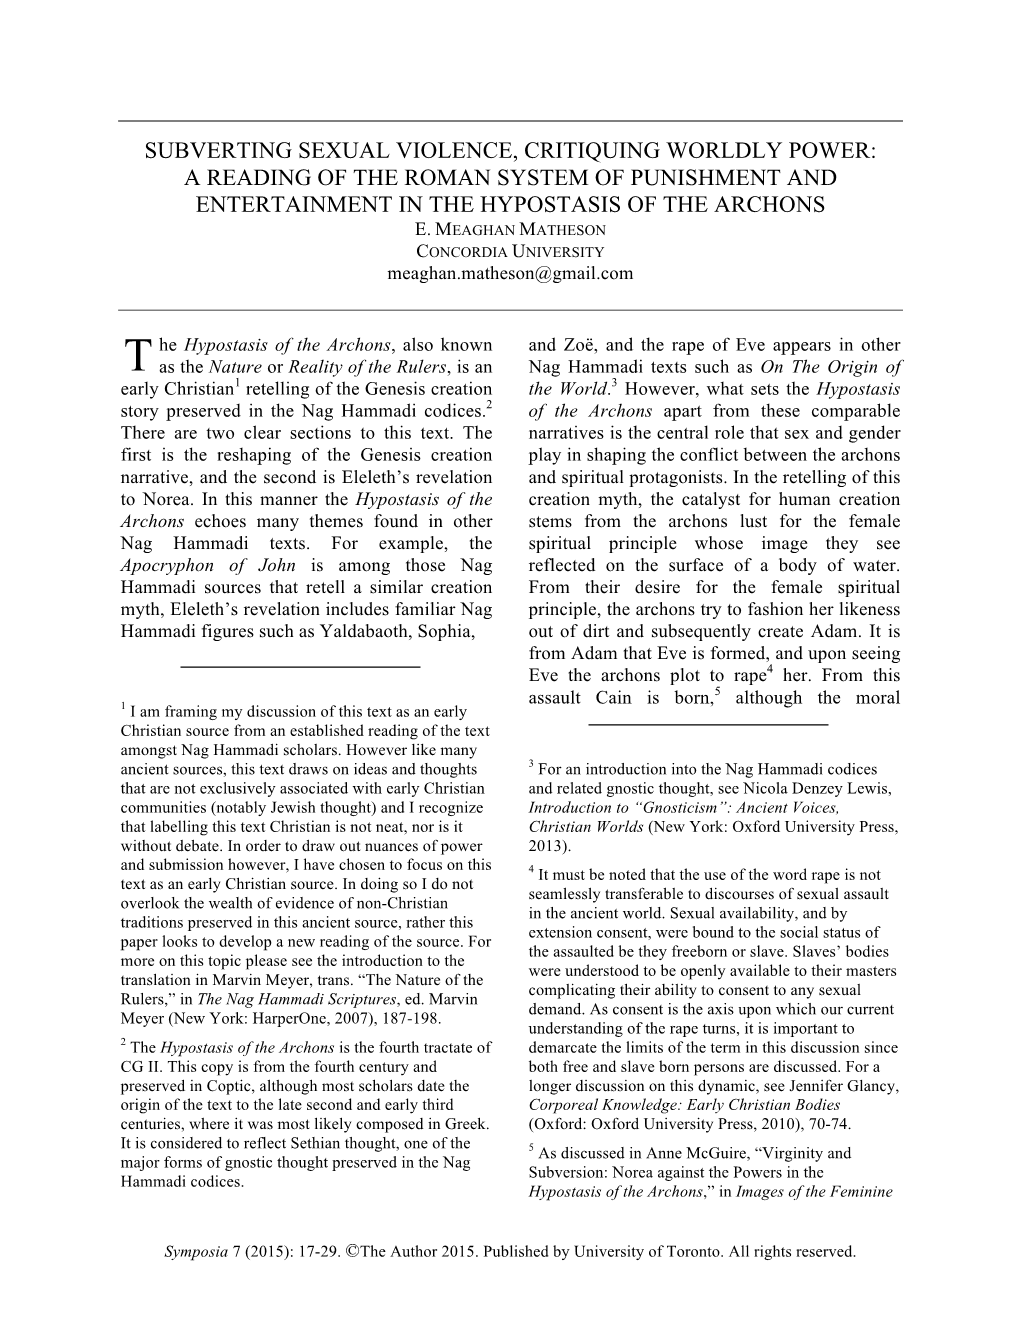 Subverting Sexual Violence, Critiquing Worldly Power: a Reading of the Roman System of Punishment and Entertainment in the Hypostasis of the Archons E